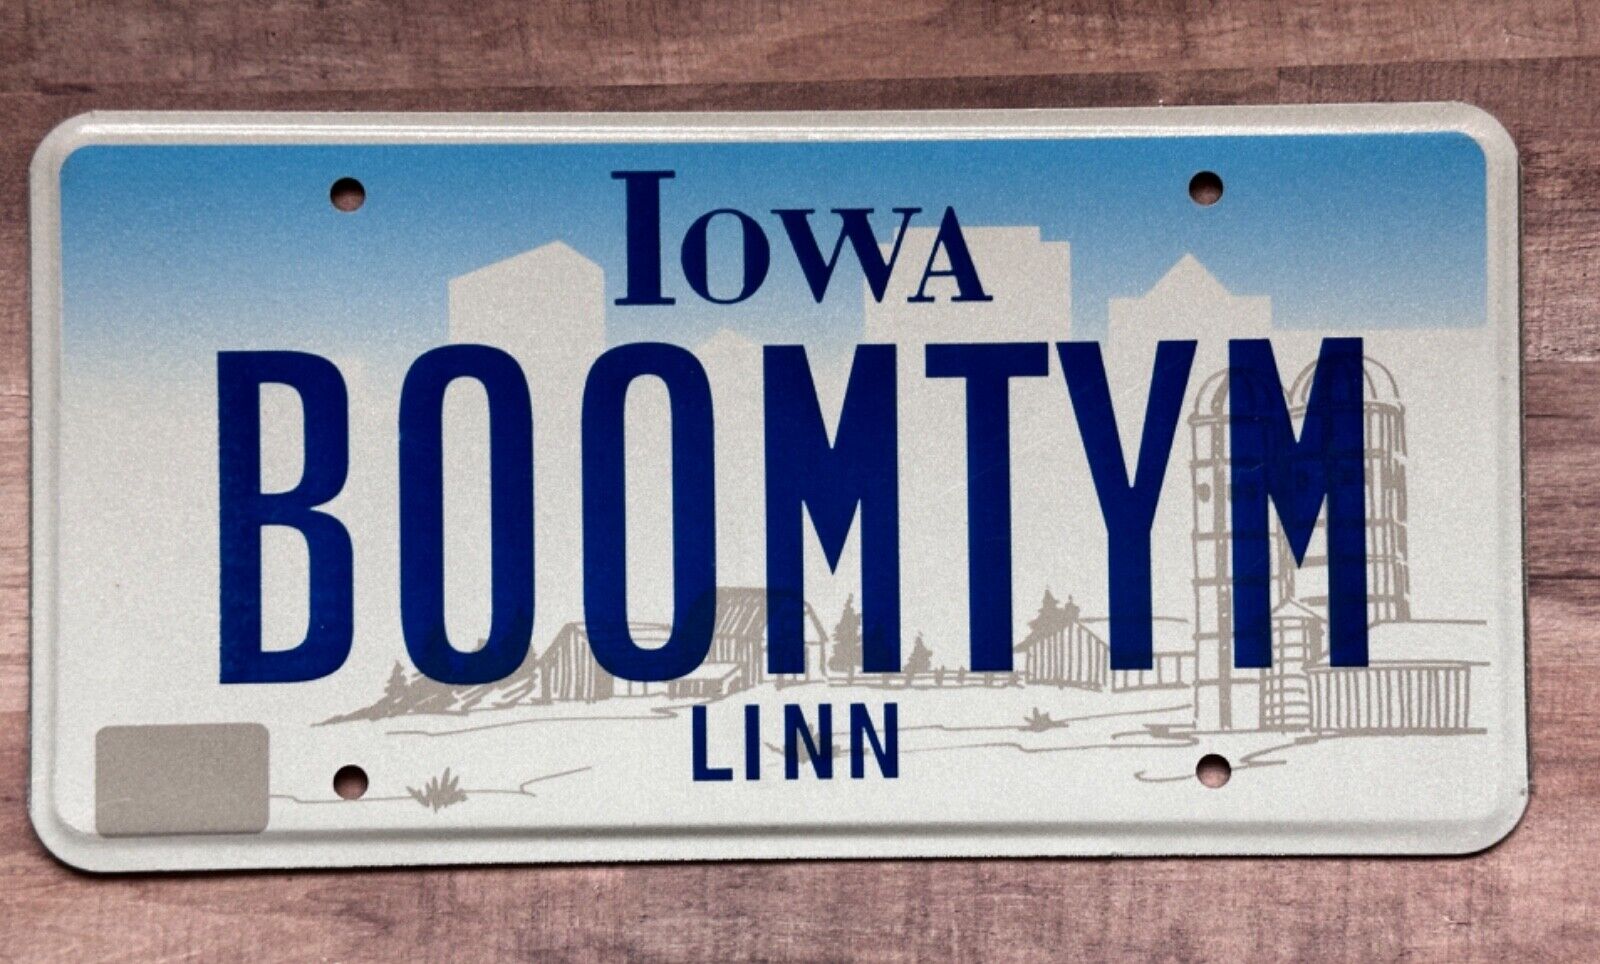 Iowa 1999 Personalized License Plate #BOOMTYM boom time